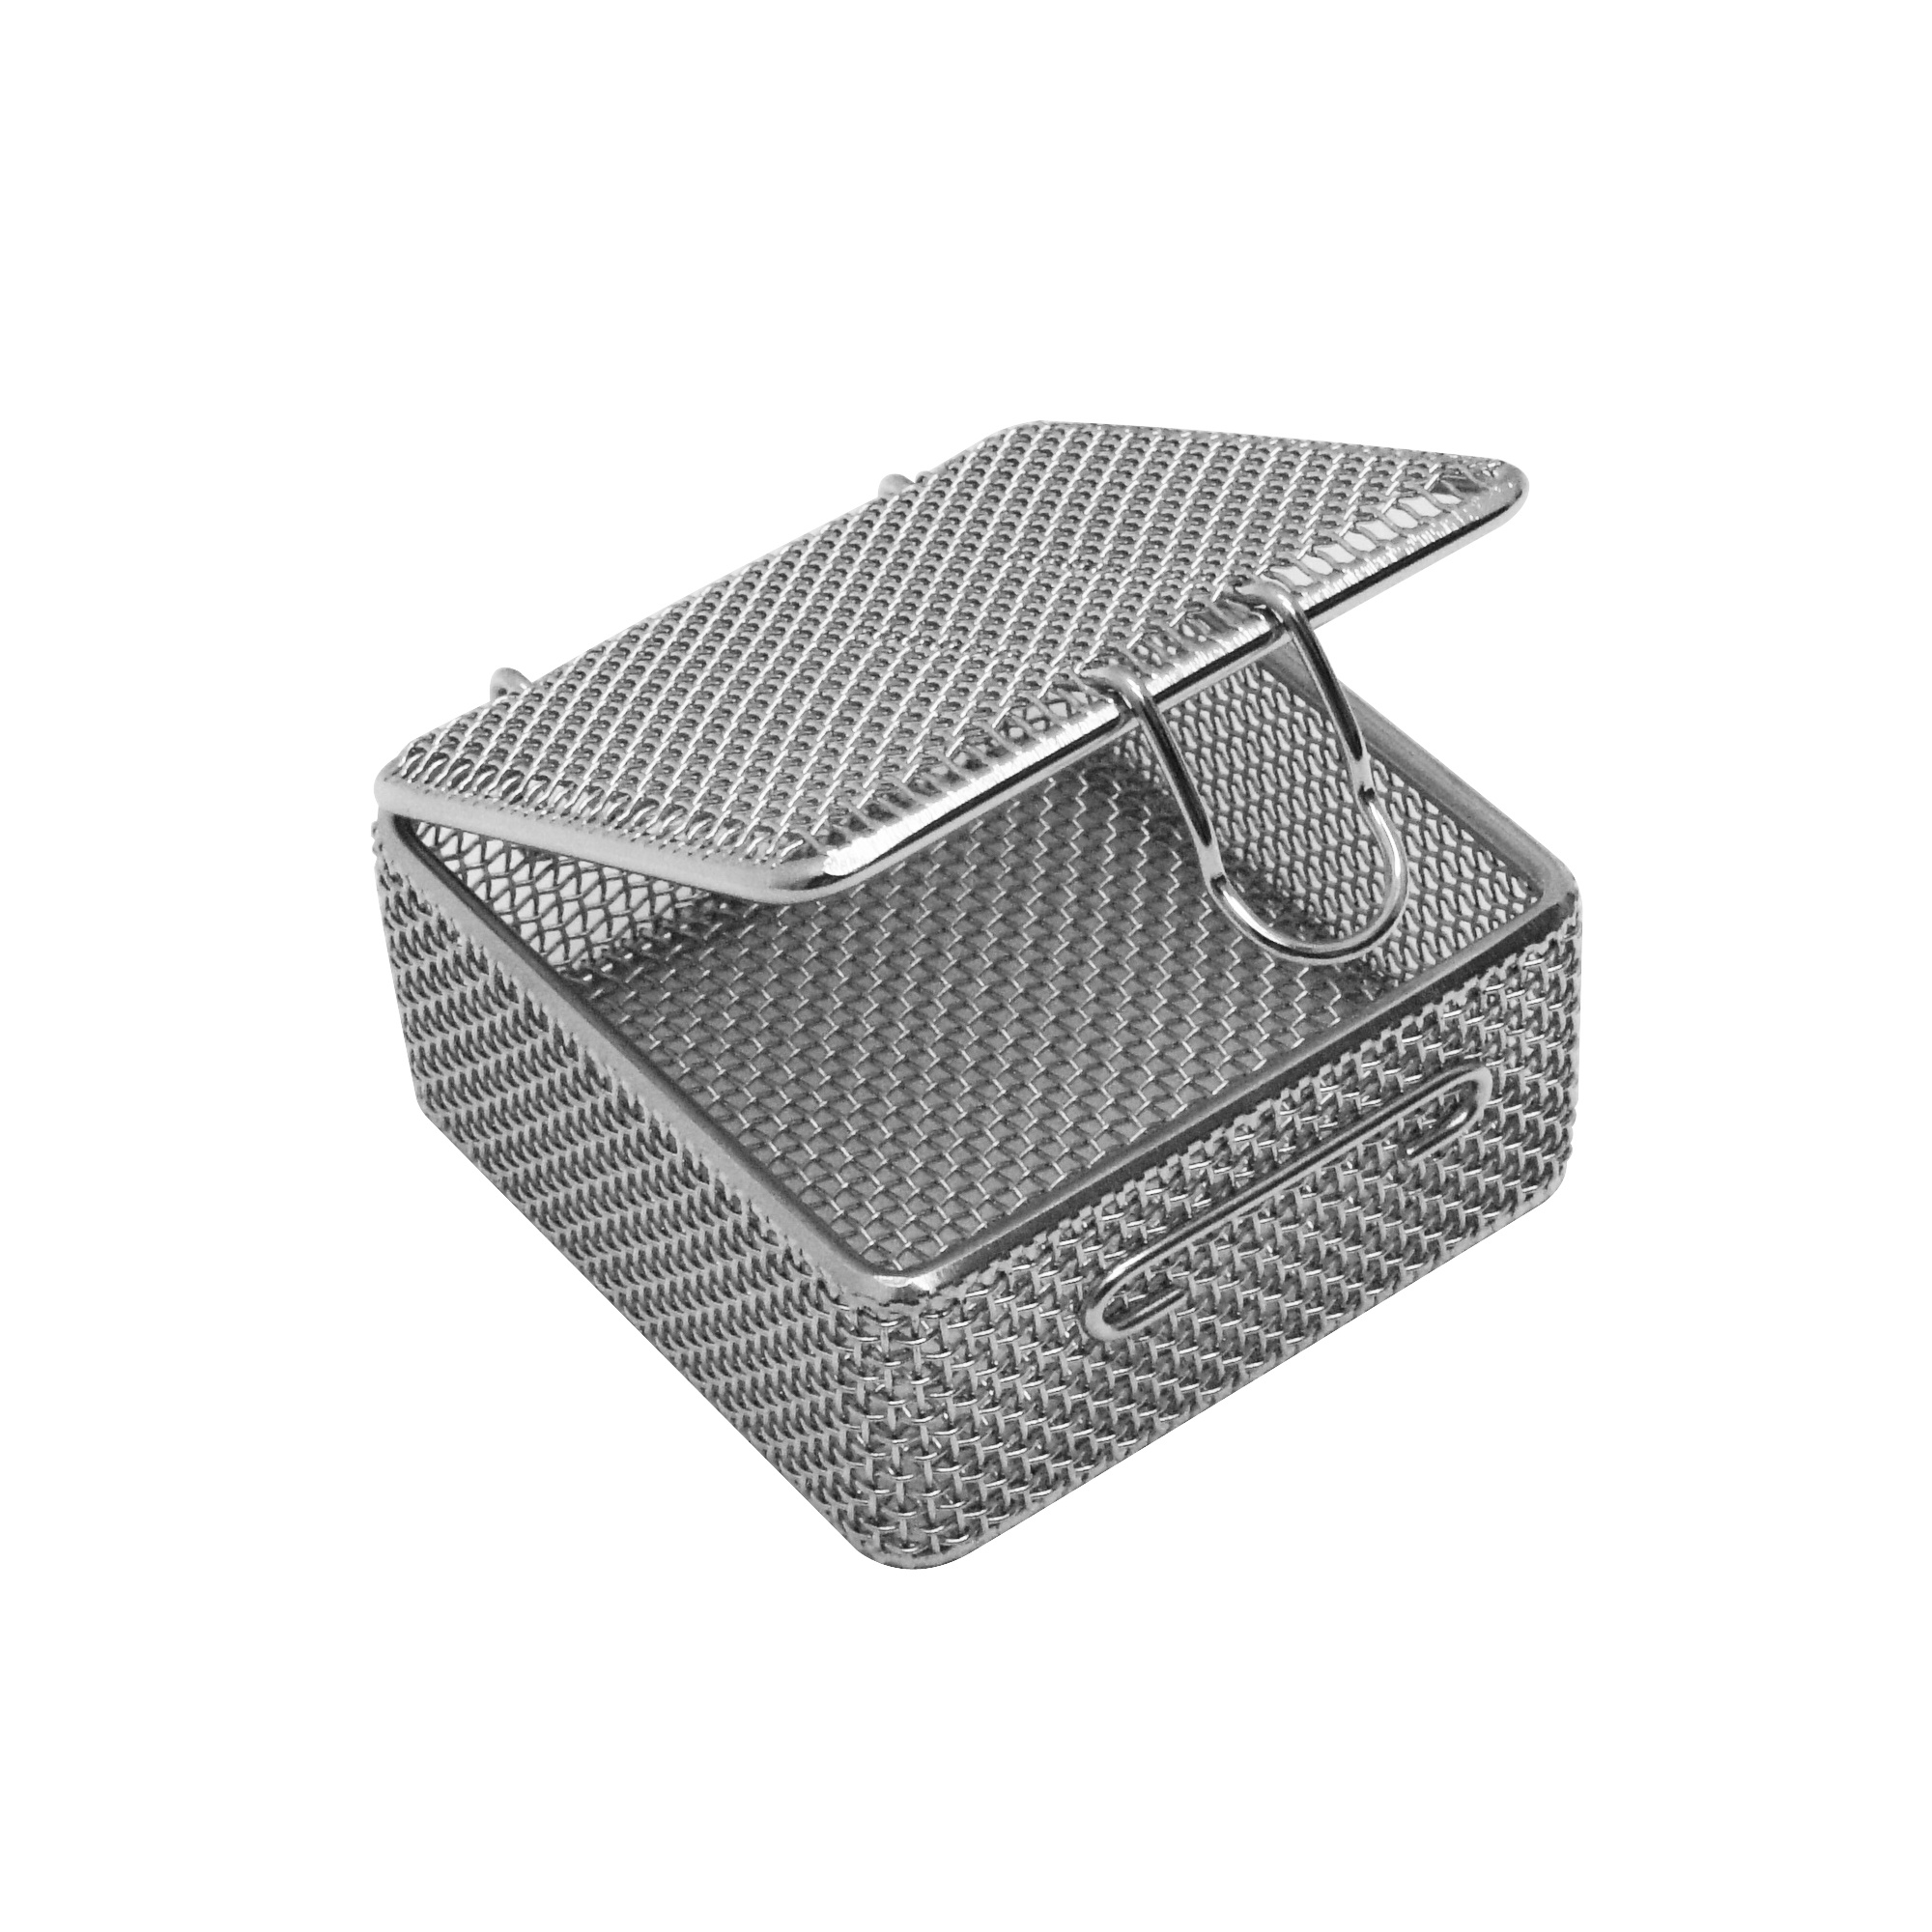 Small parts sieve trays with lid Image